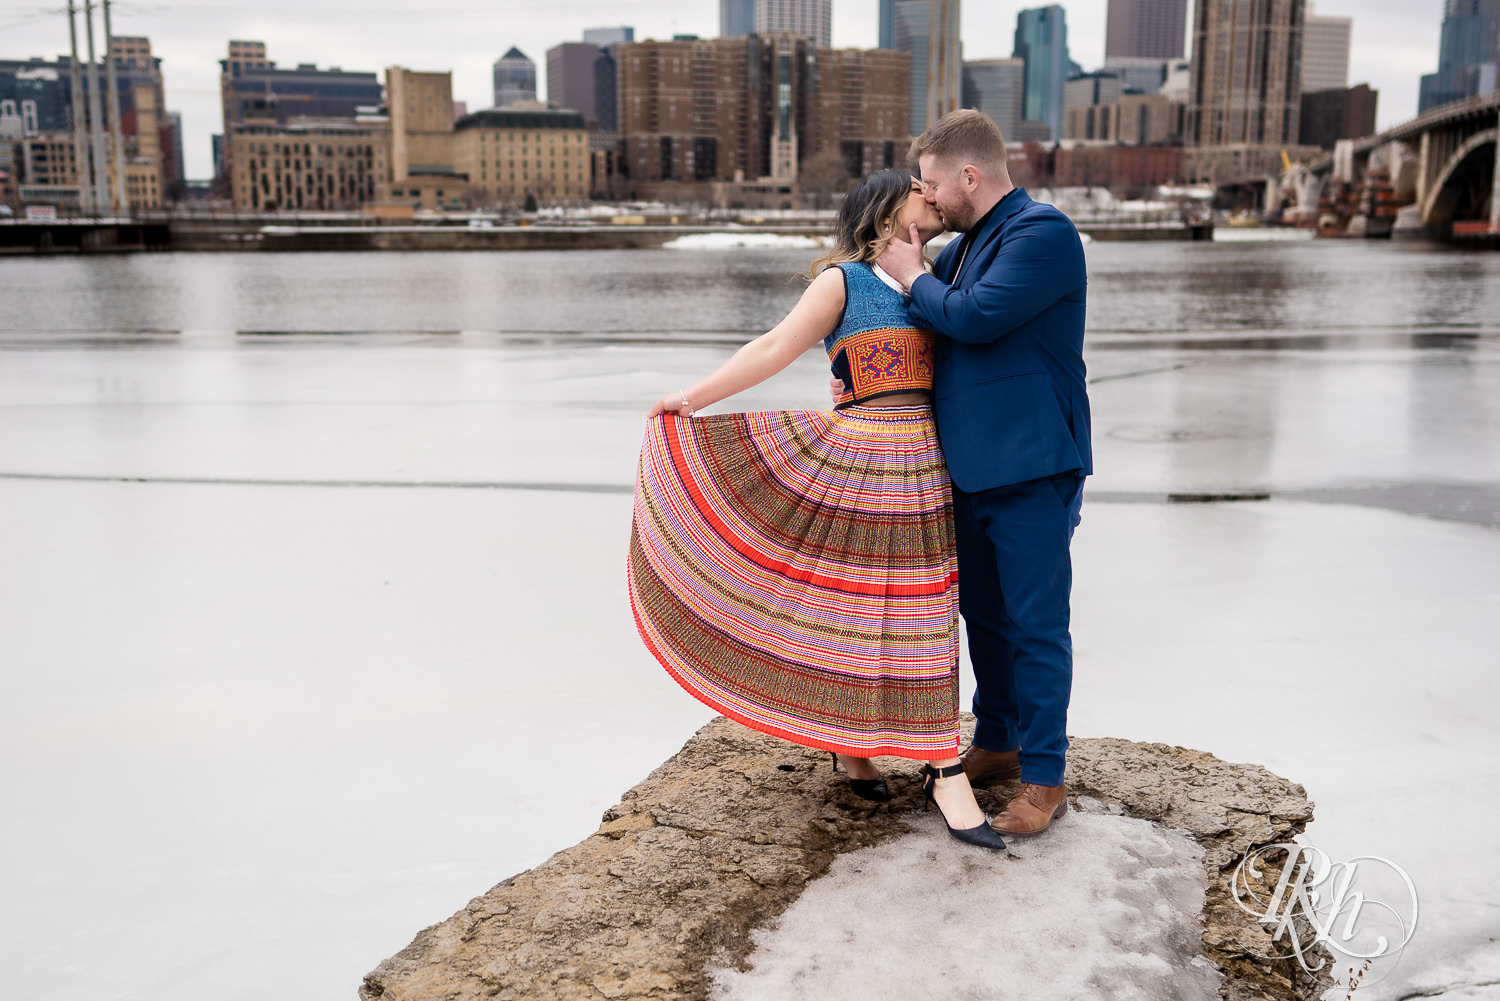 Man and Hmong woman kiss in Saint Anthony Main in Minneapolis, Minnesota with city in the background.